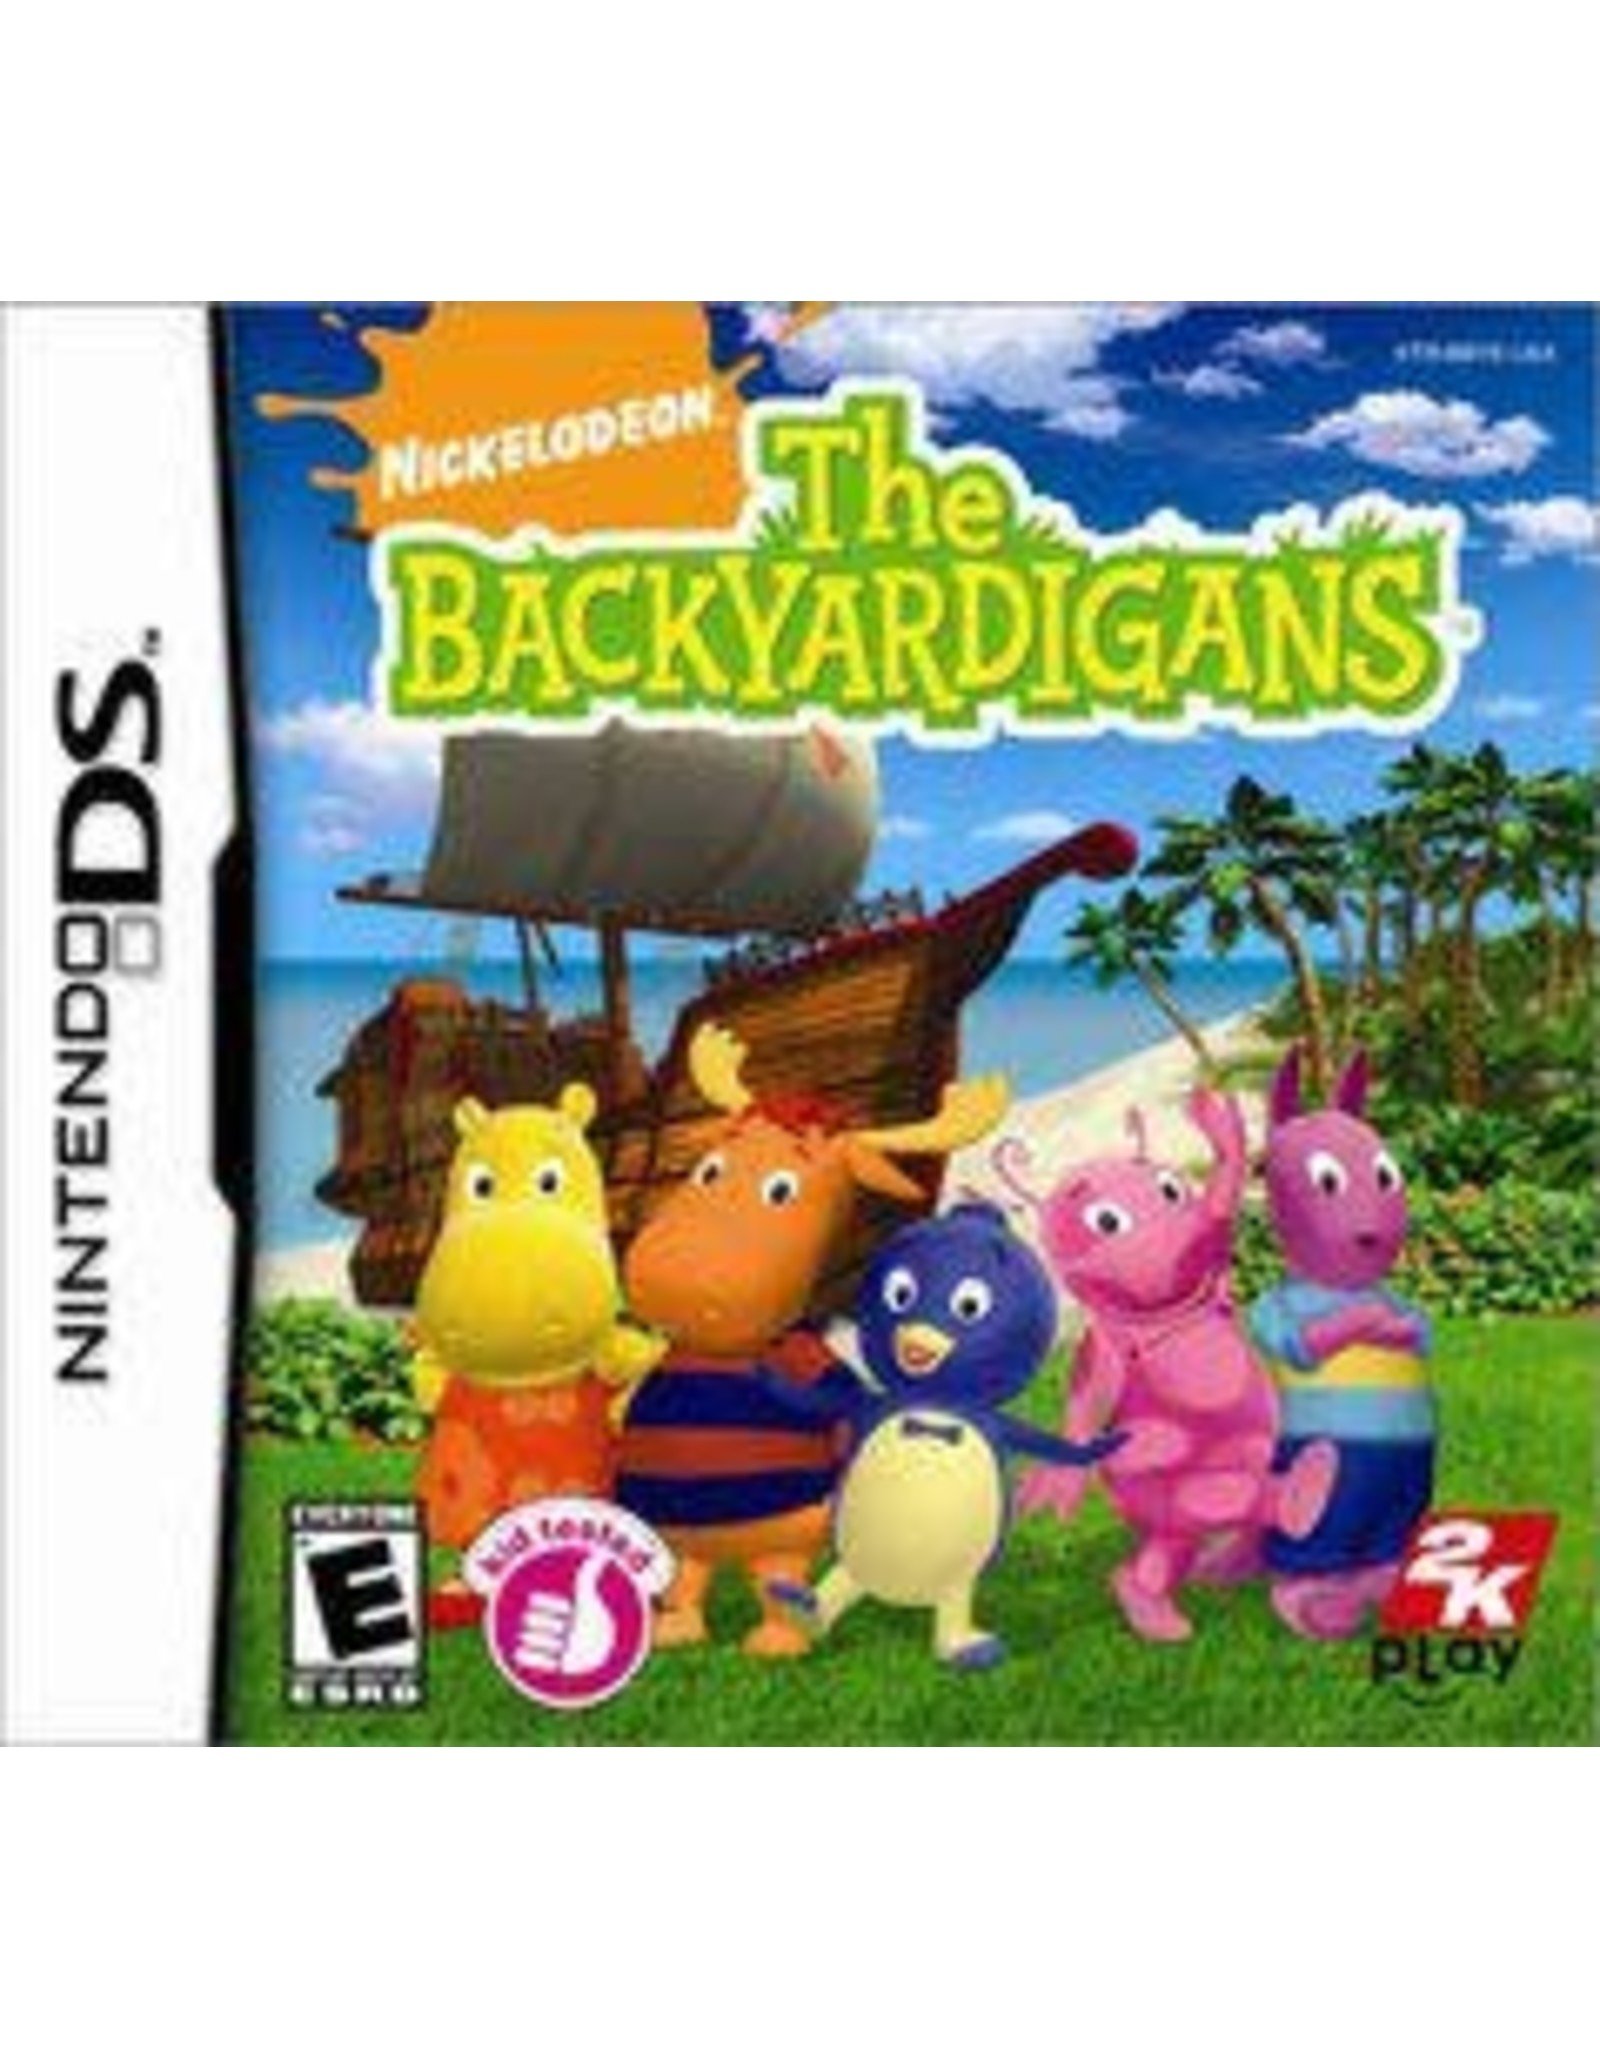 Nintendo DS Backyardigans, The (Cart Only)